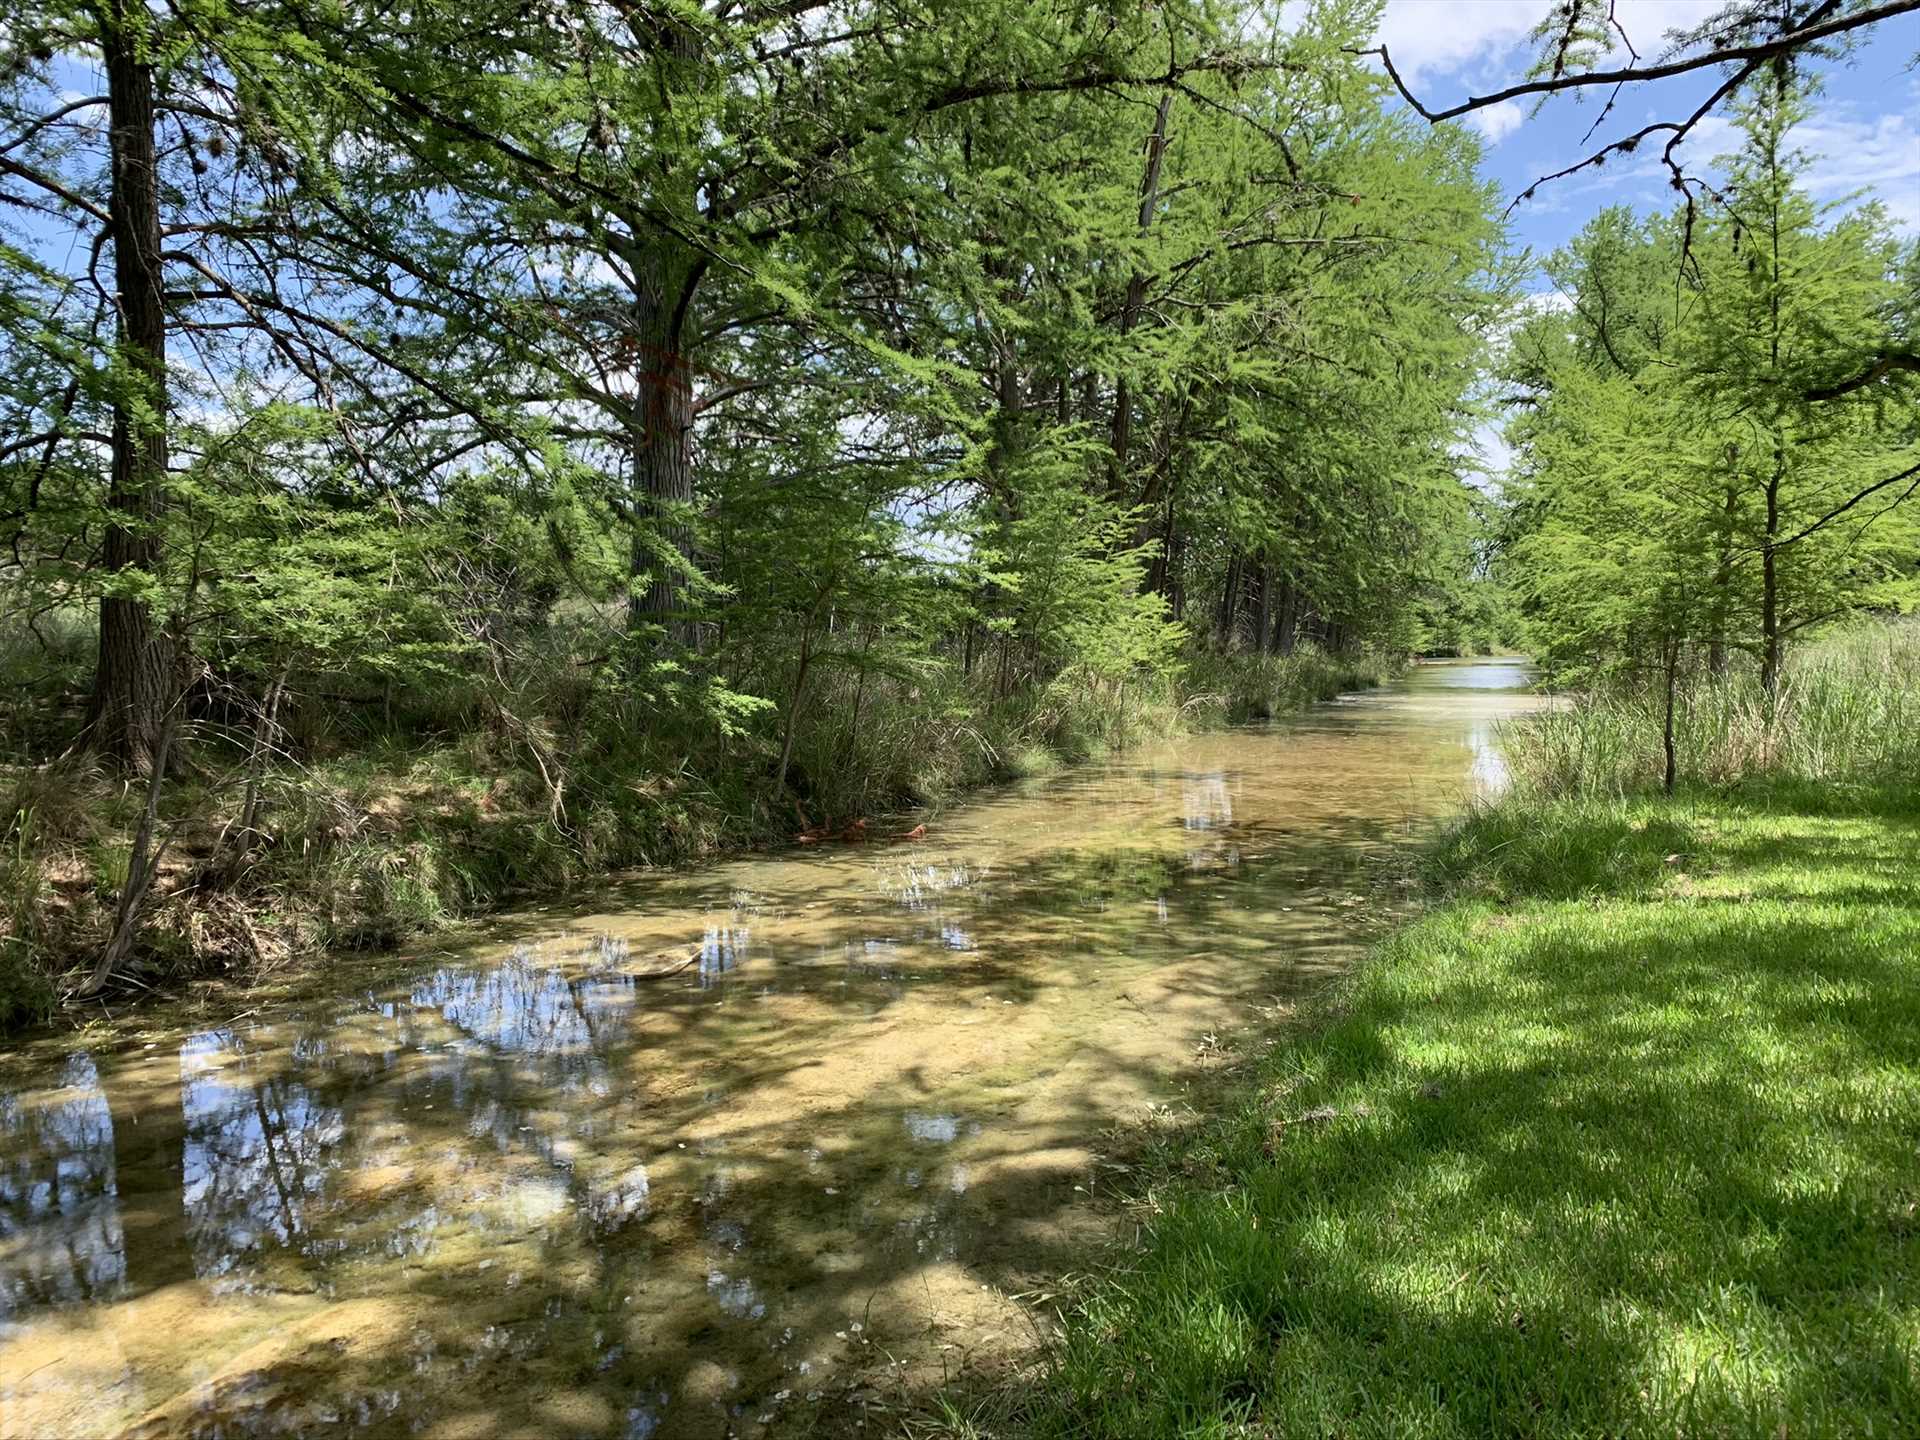                                                 Beautiful Bandera Creek is very close to the property, providing space to relax and watch birds and other wildlife.